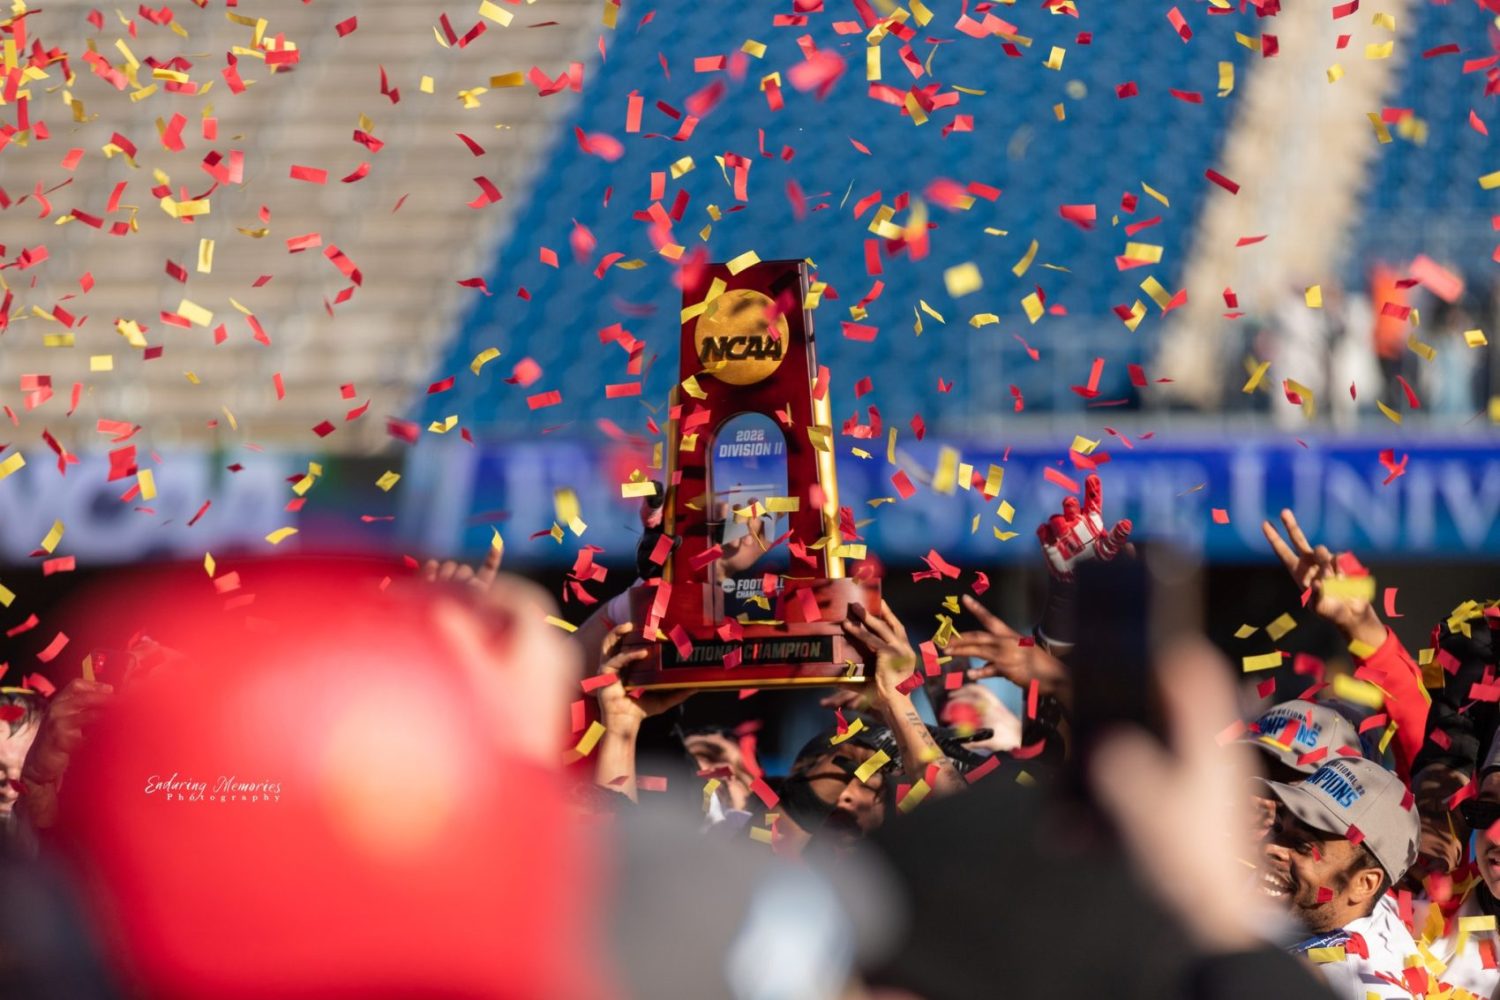 NATIONAL CHAMPIONS! Ferris State wins back-to-back national championships